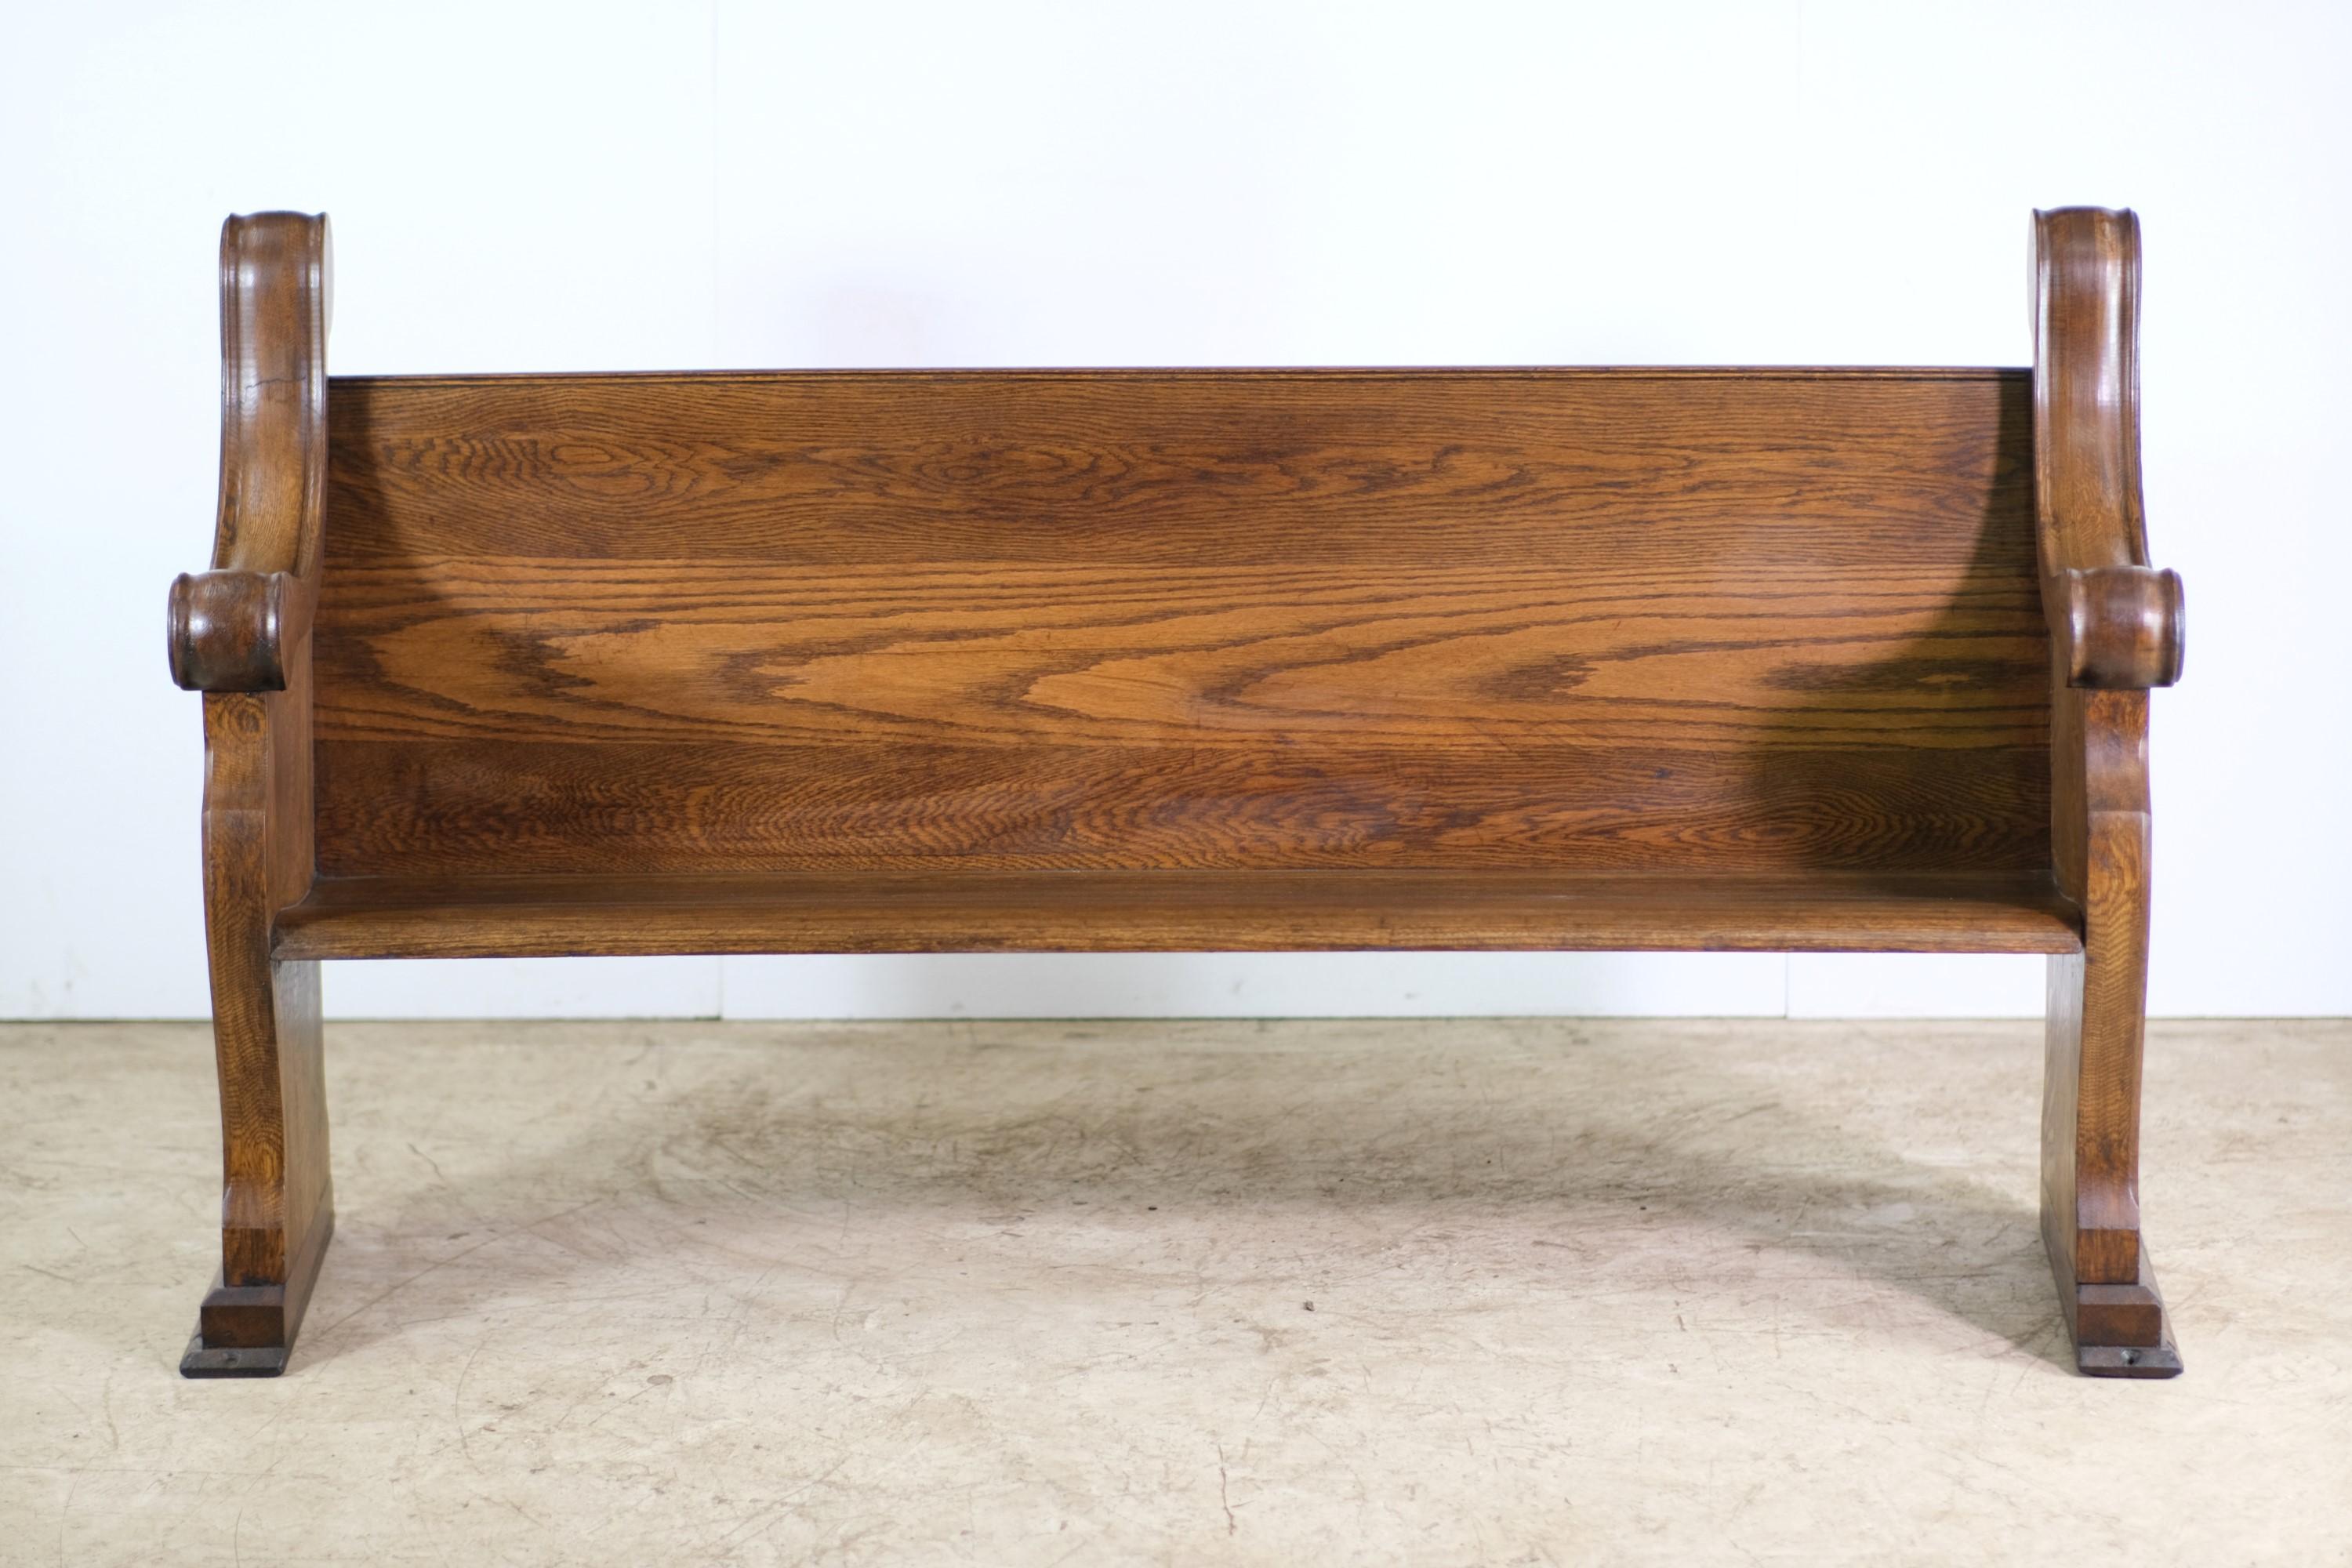 Restored early 20th century dark stained oak church pew. This features hand carved floral details and a quatrefoil on each end. This can be seen at our 2420 Broadway location on the upper west side in Manhattan.